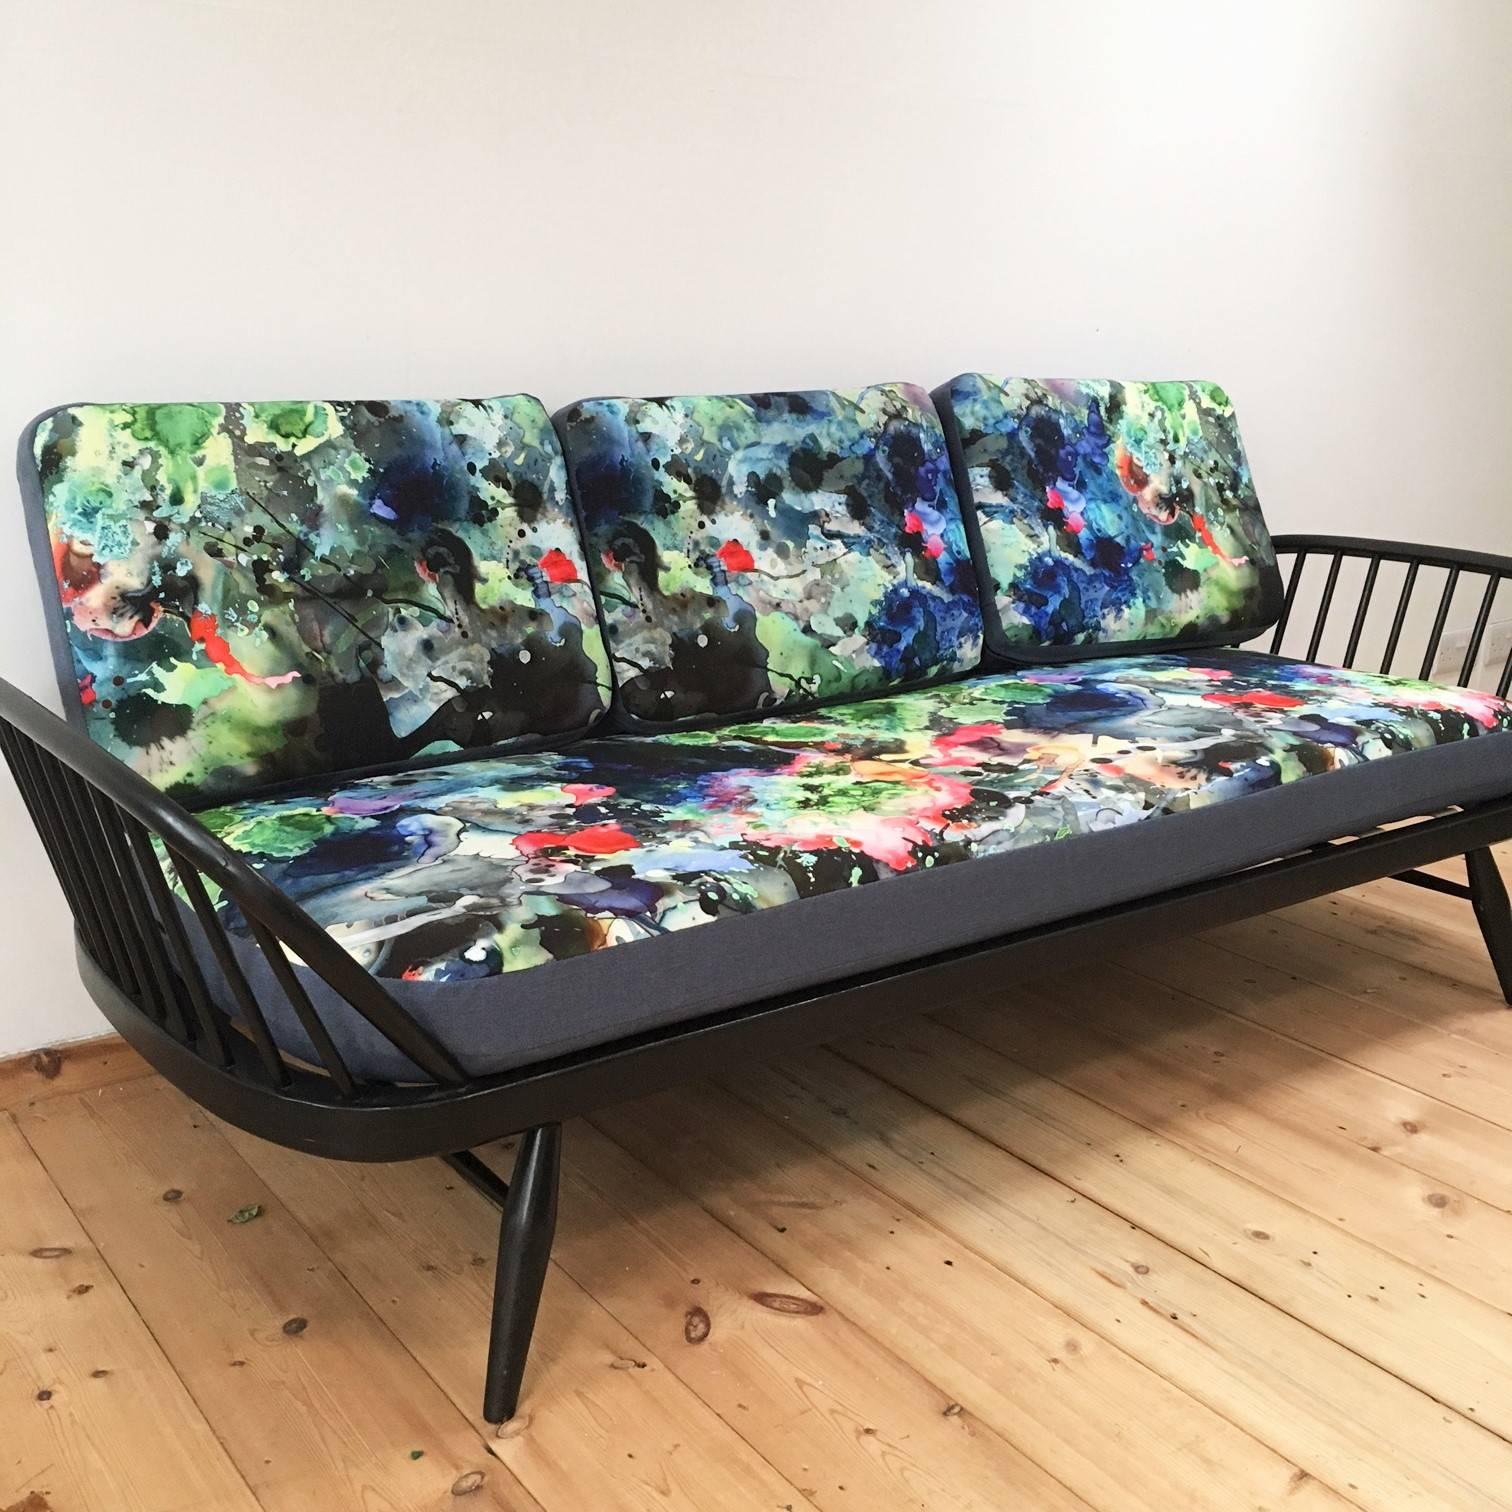 Mid-Century Modern Mid-20th Century Ercol Studio Couch with Timorous Beasties Print Upholstery For Sale